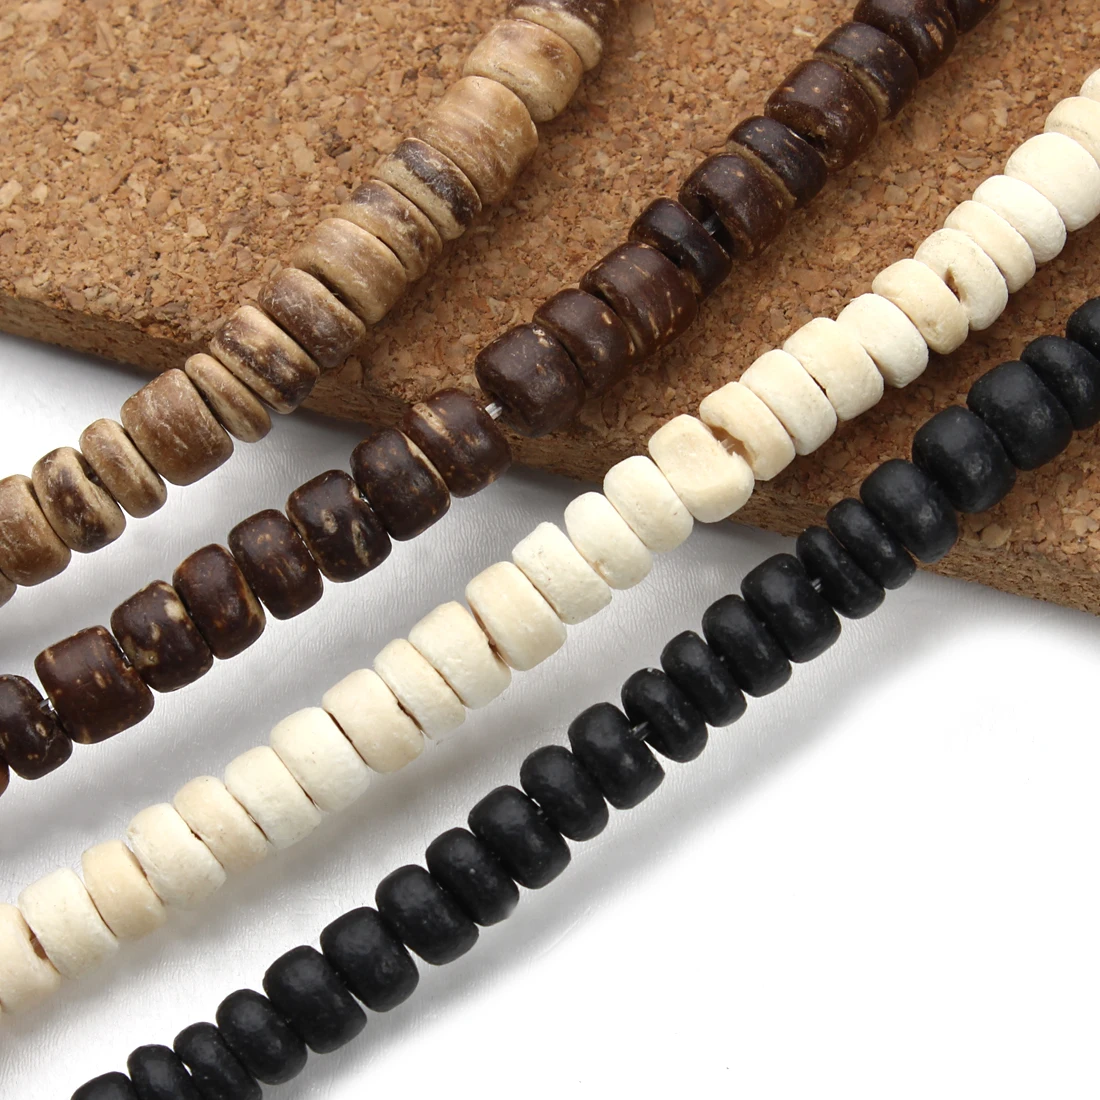 300pcs Natural Wooden Beads Buddhism Bijoux Round Coconut Shell Wood Loose Spacer Beads For DIY Bracelet Craft Jewelry Making